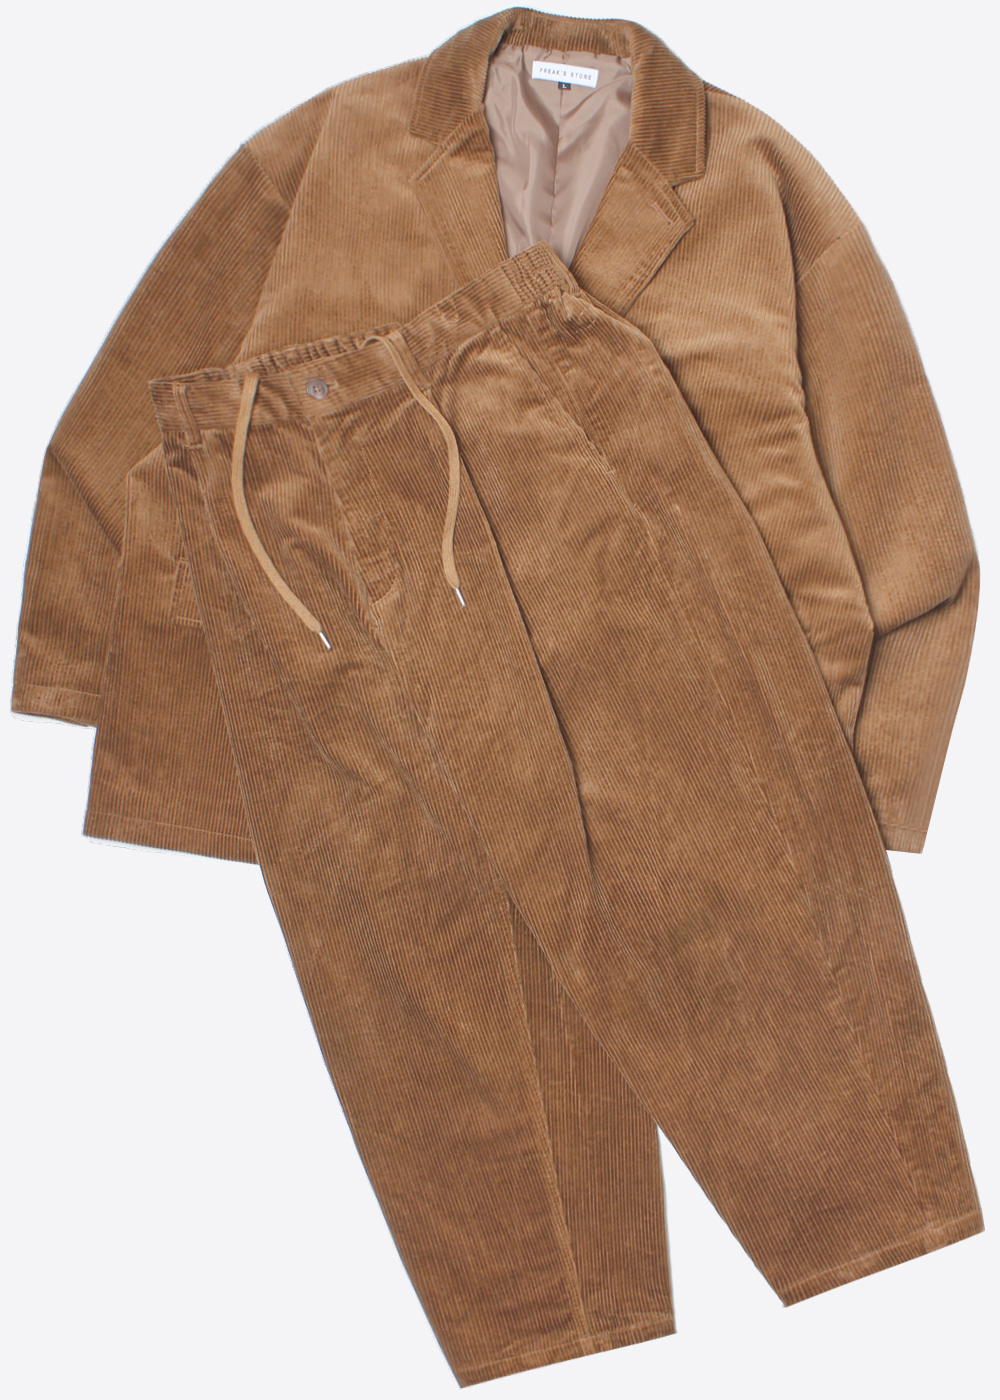 FREAK’S STORE’over fit’ corduroy two-piece work jacket pant